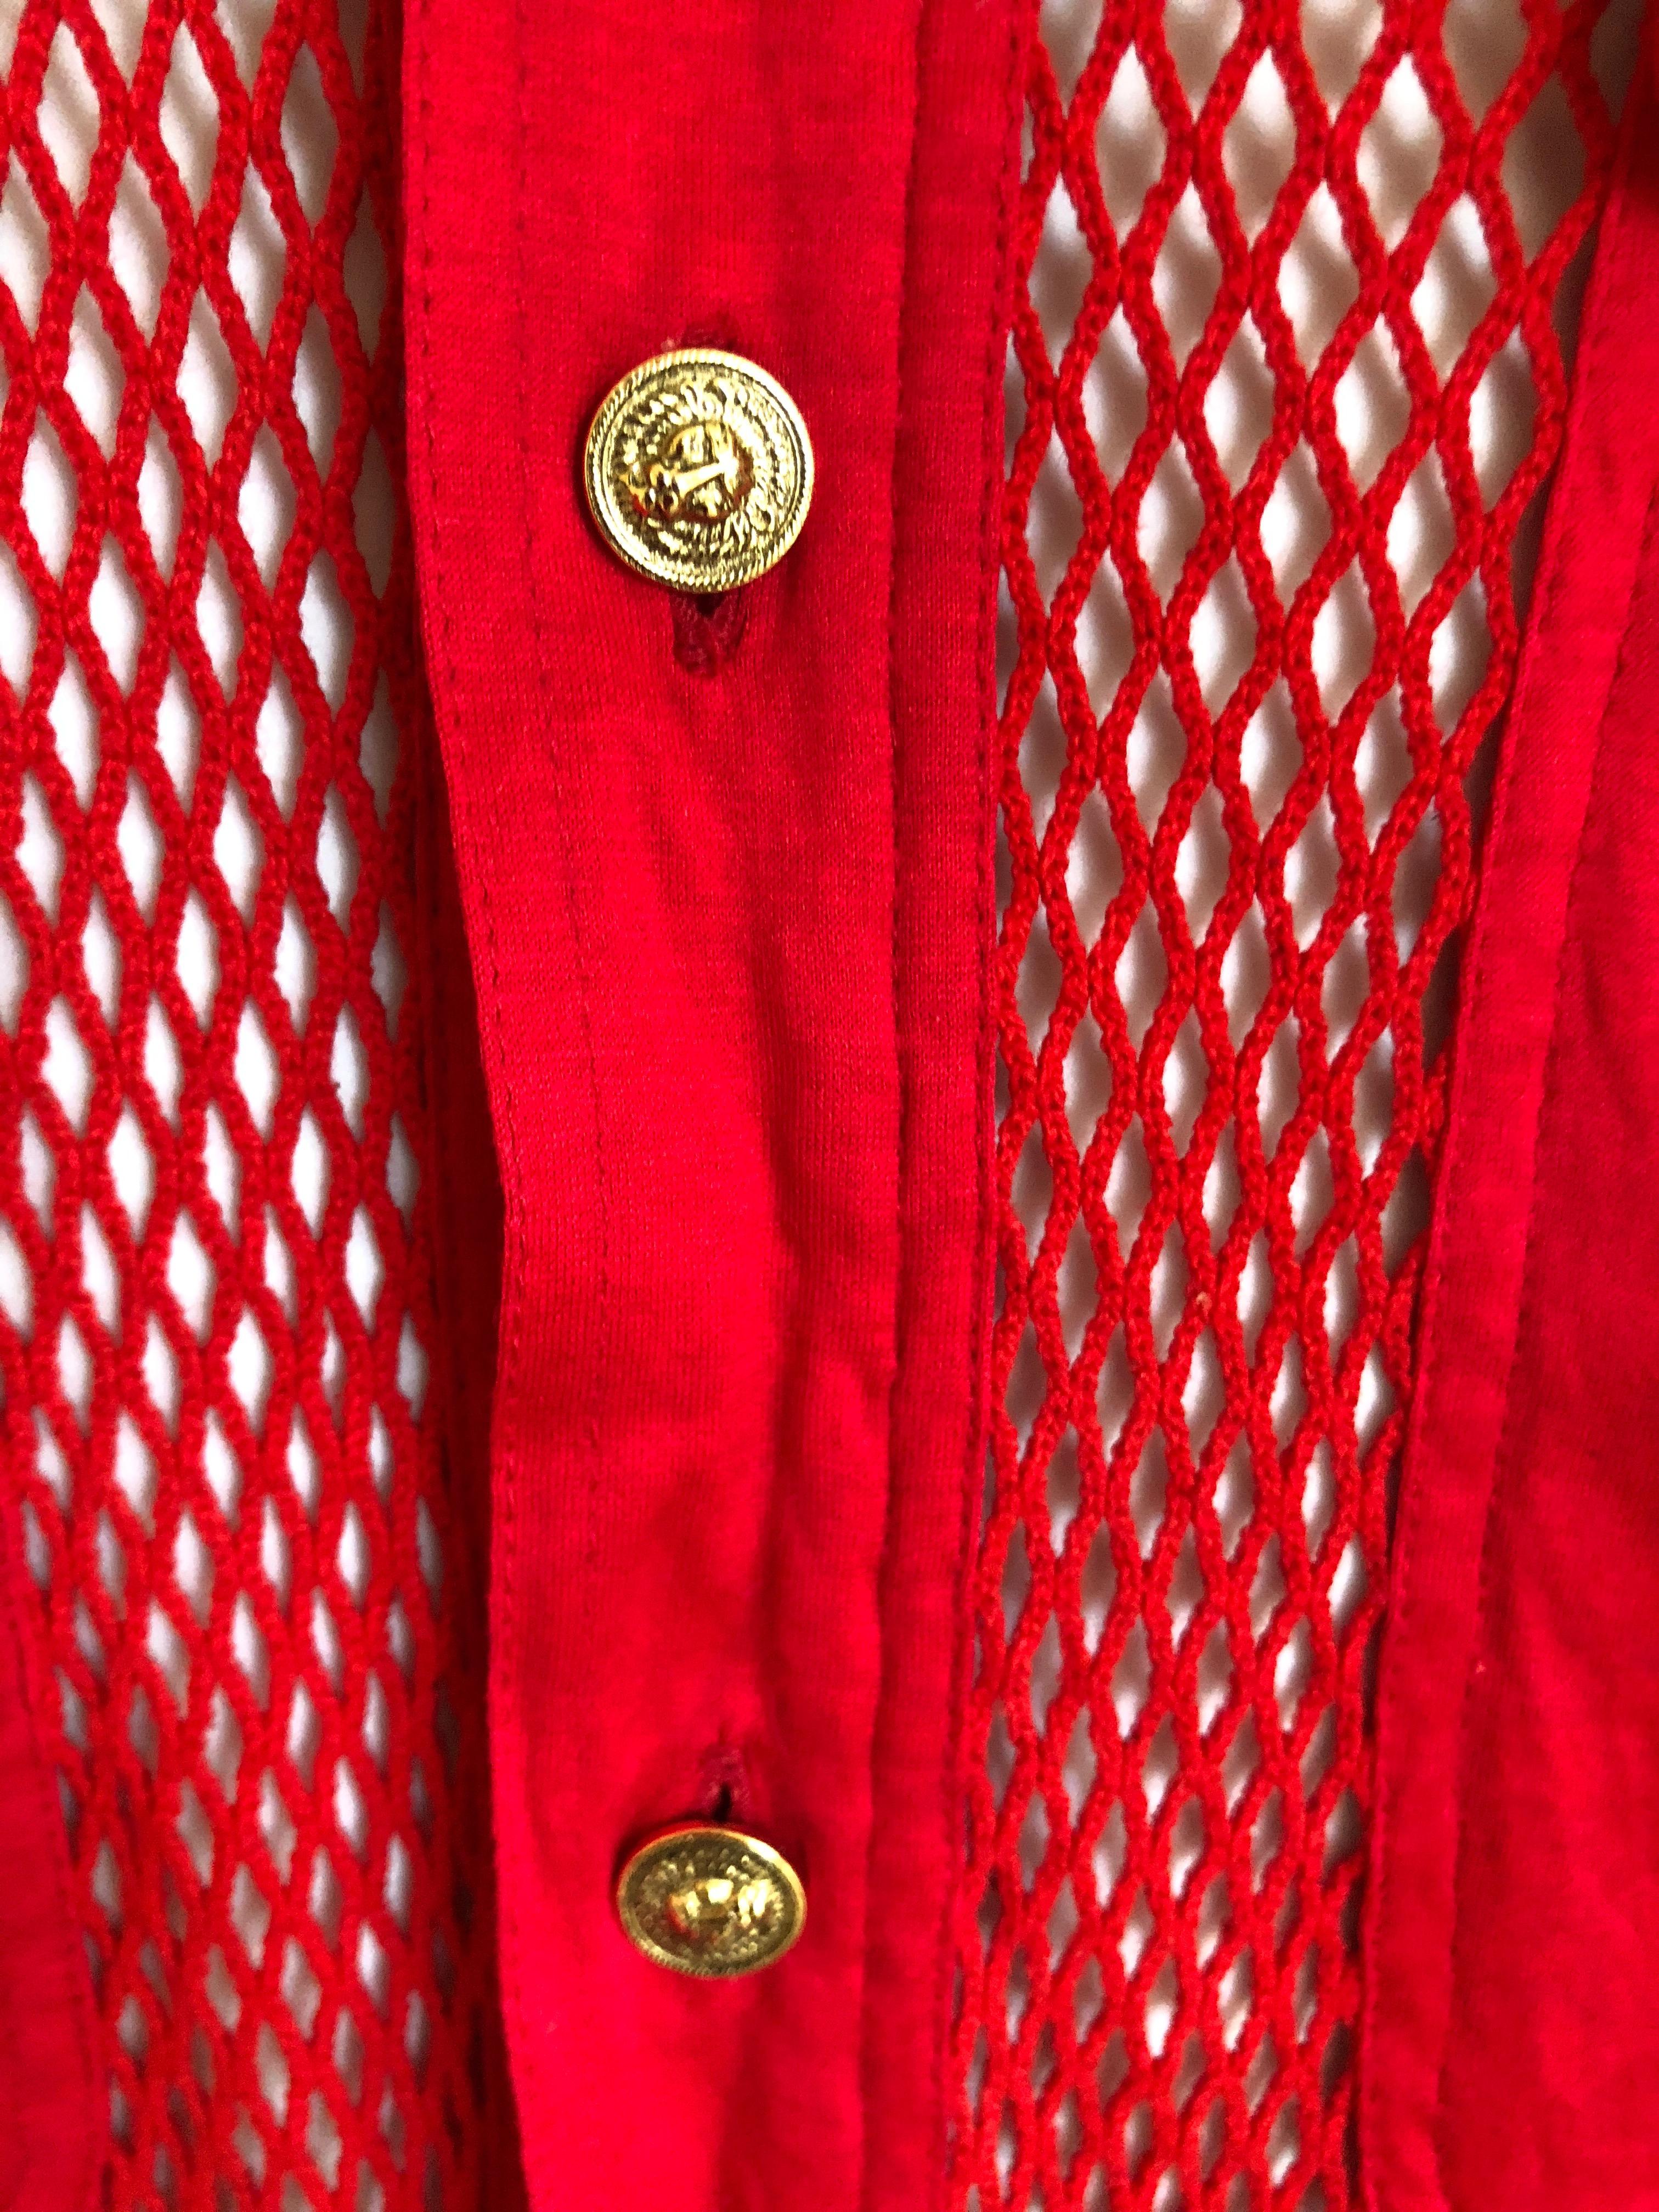 Versus Gianni Versace Rare 1993 Red Sheer Mesh Men's Large Shirt  In Good Condition For Sale In Cloverdale, CA